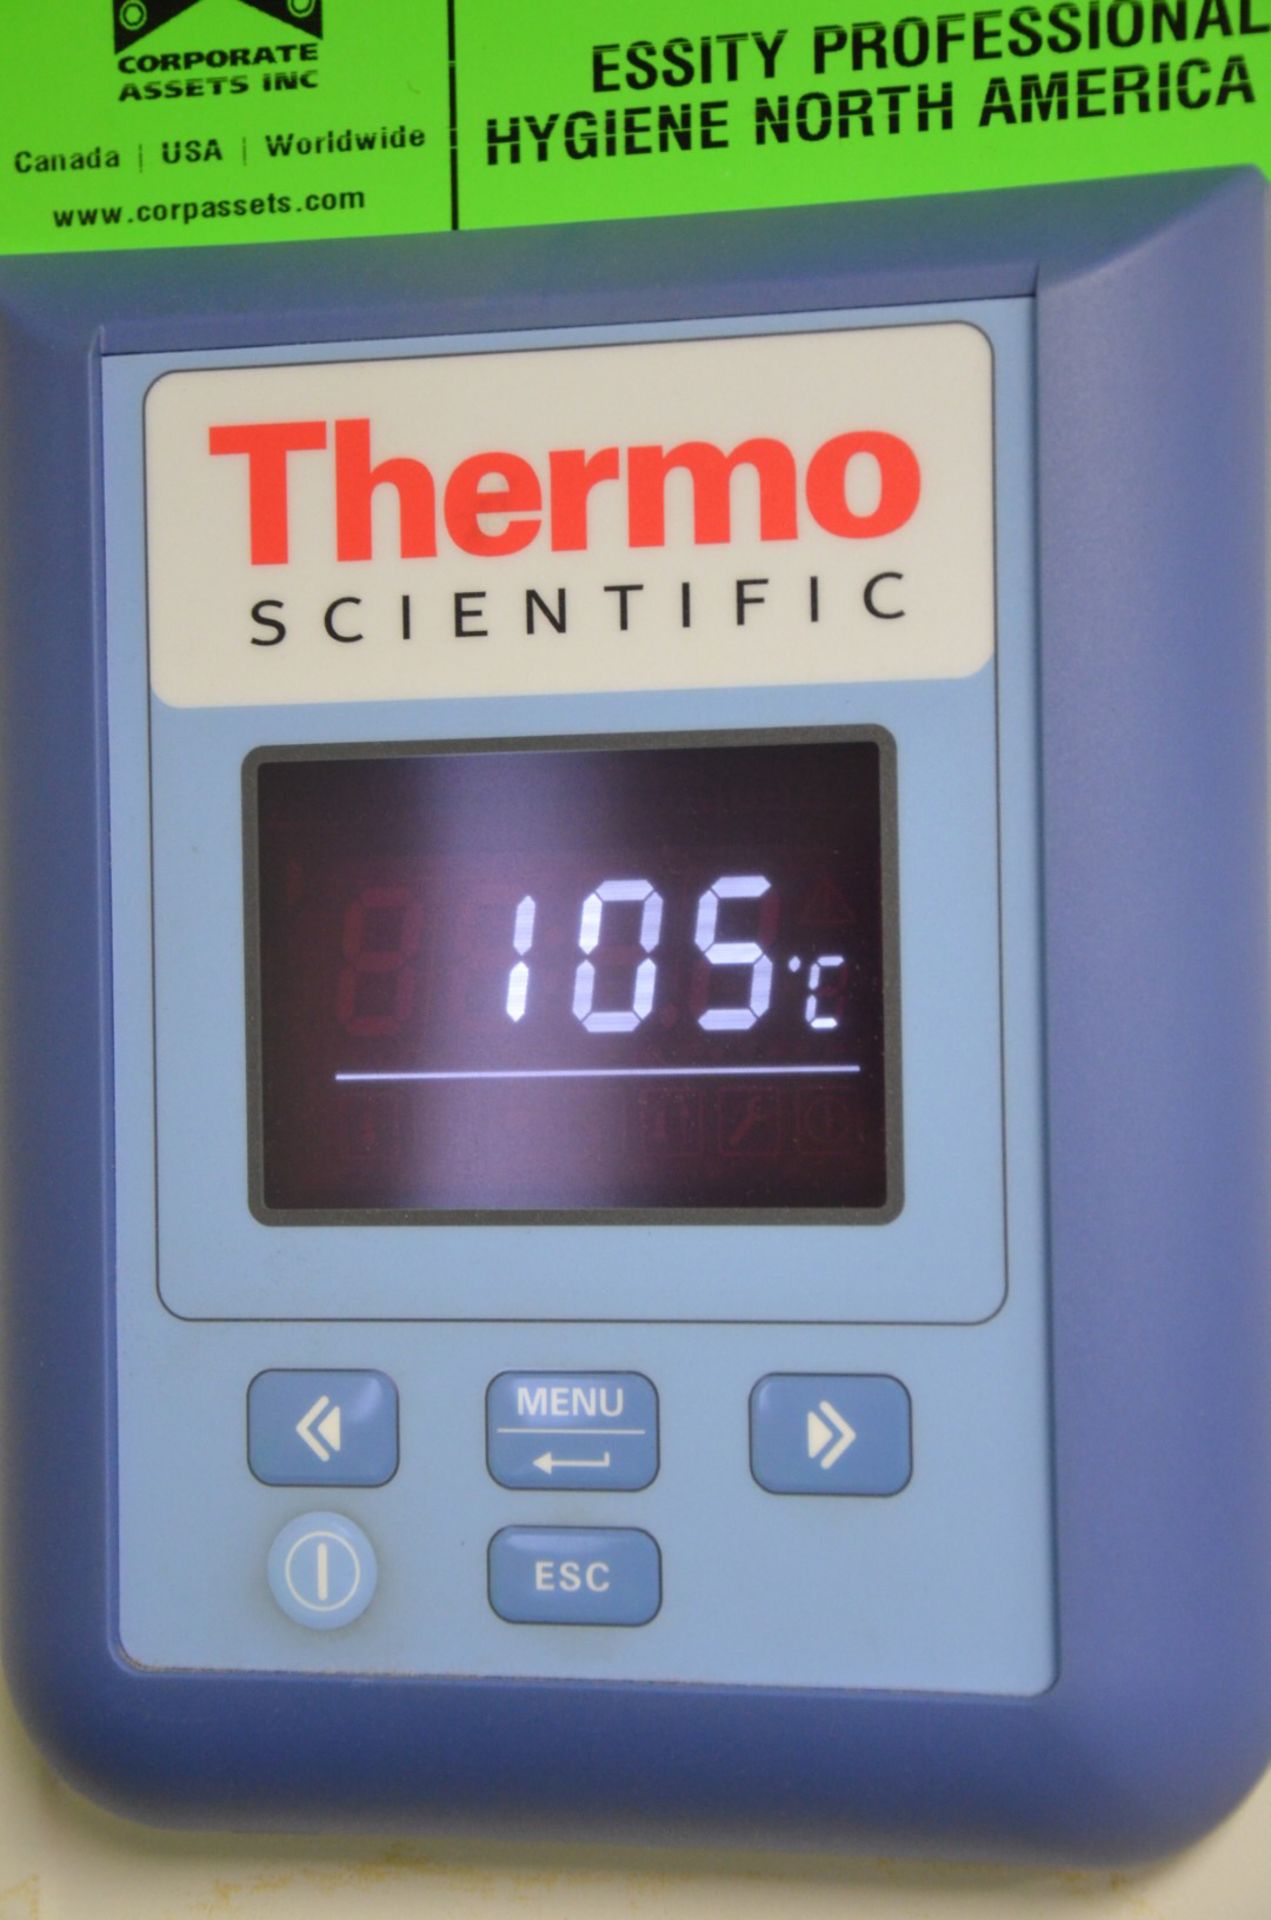 THERMO SCIENTIFIC (2013) HERATHERM OMS180 DIGITAL BENCH TOP LAB OVEN WITH DIGITAL MICROPROCESSOR - Image 4 of 9